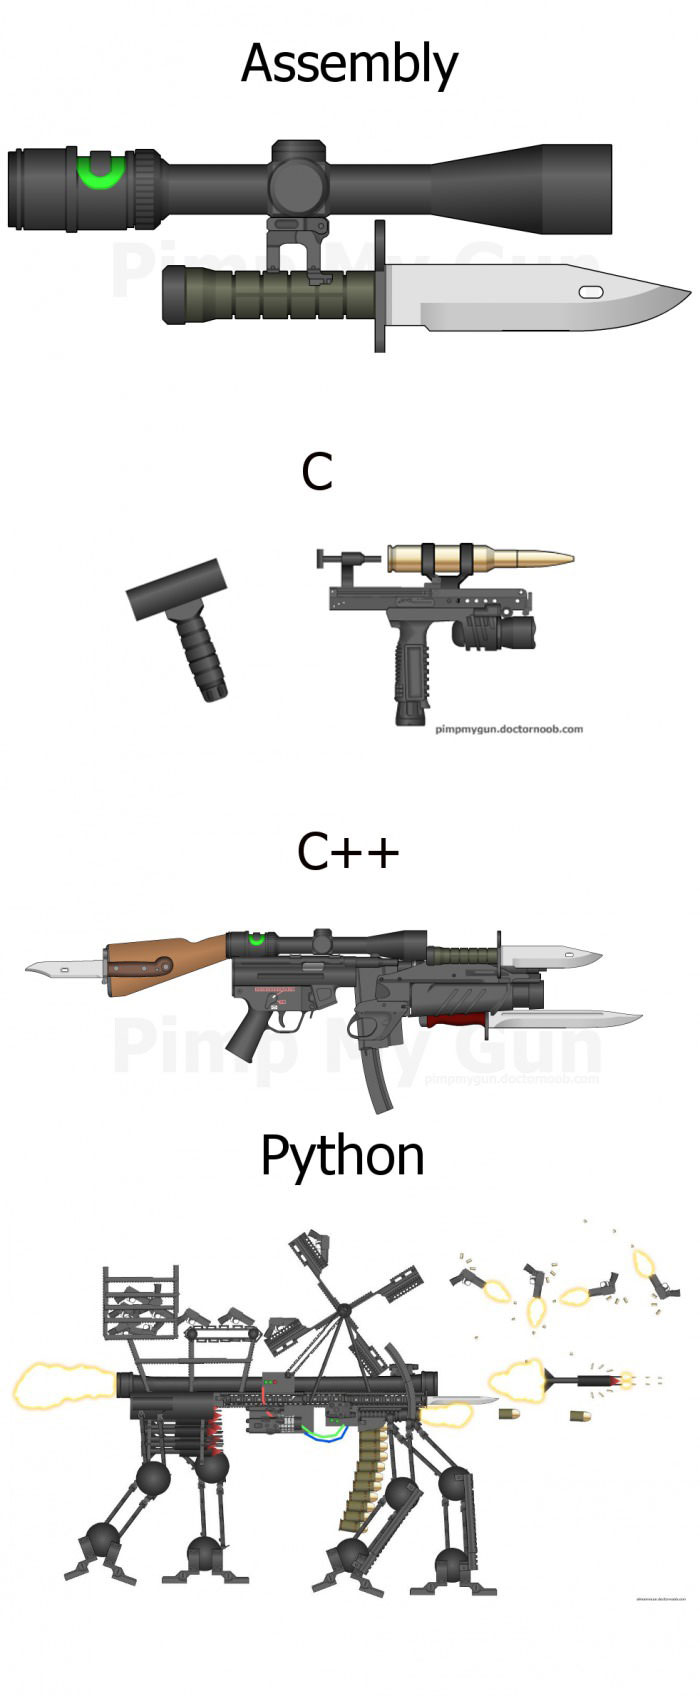 different programming languages explained through weaponry